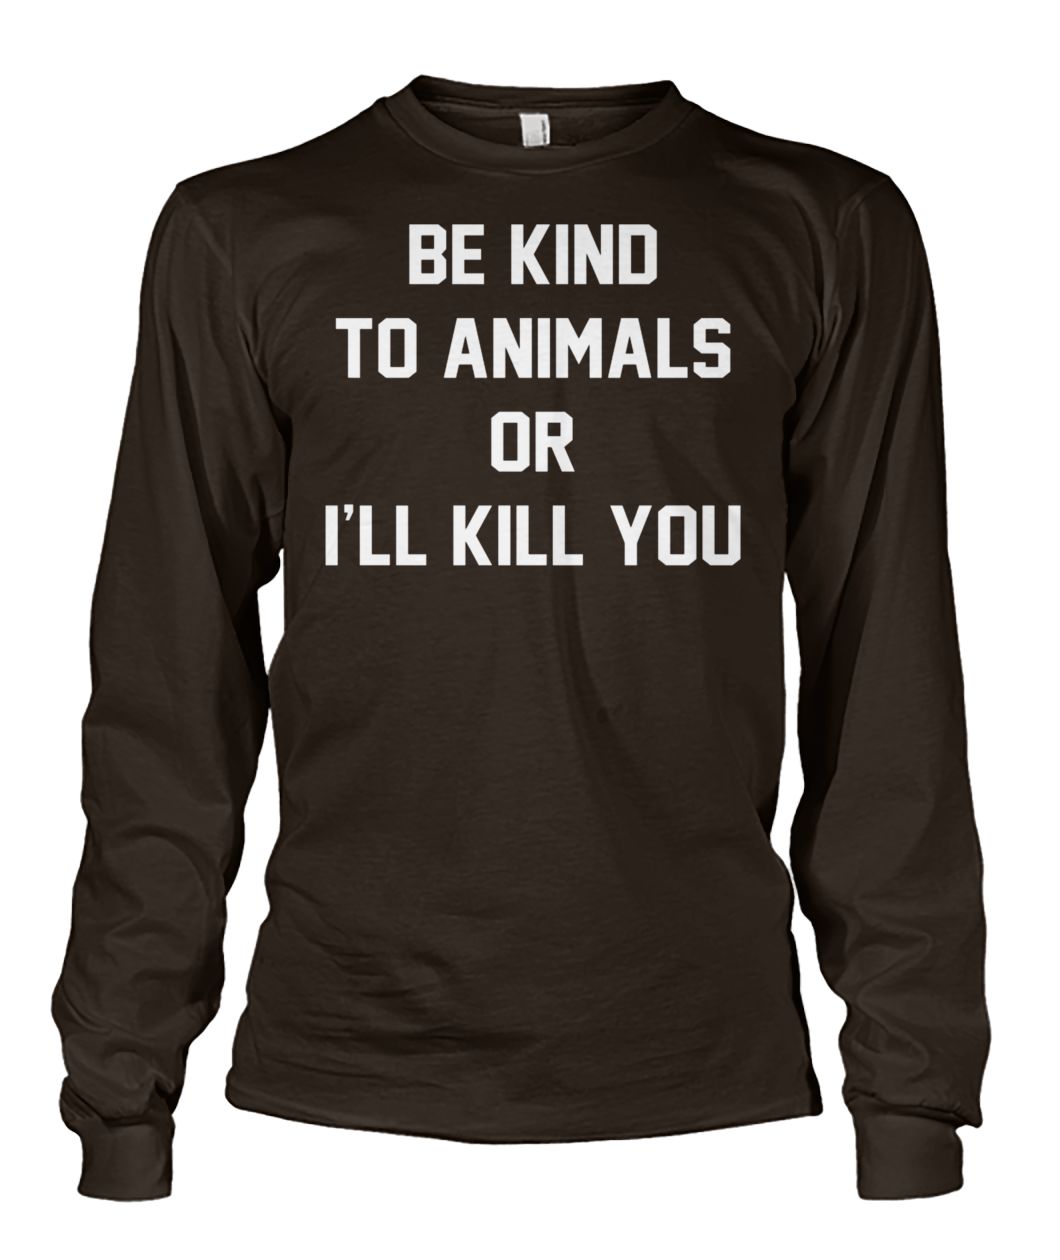 Animal rights be kind to animals or I'll kill you unisex long sleeve